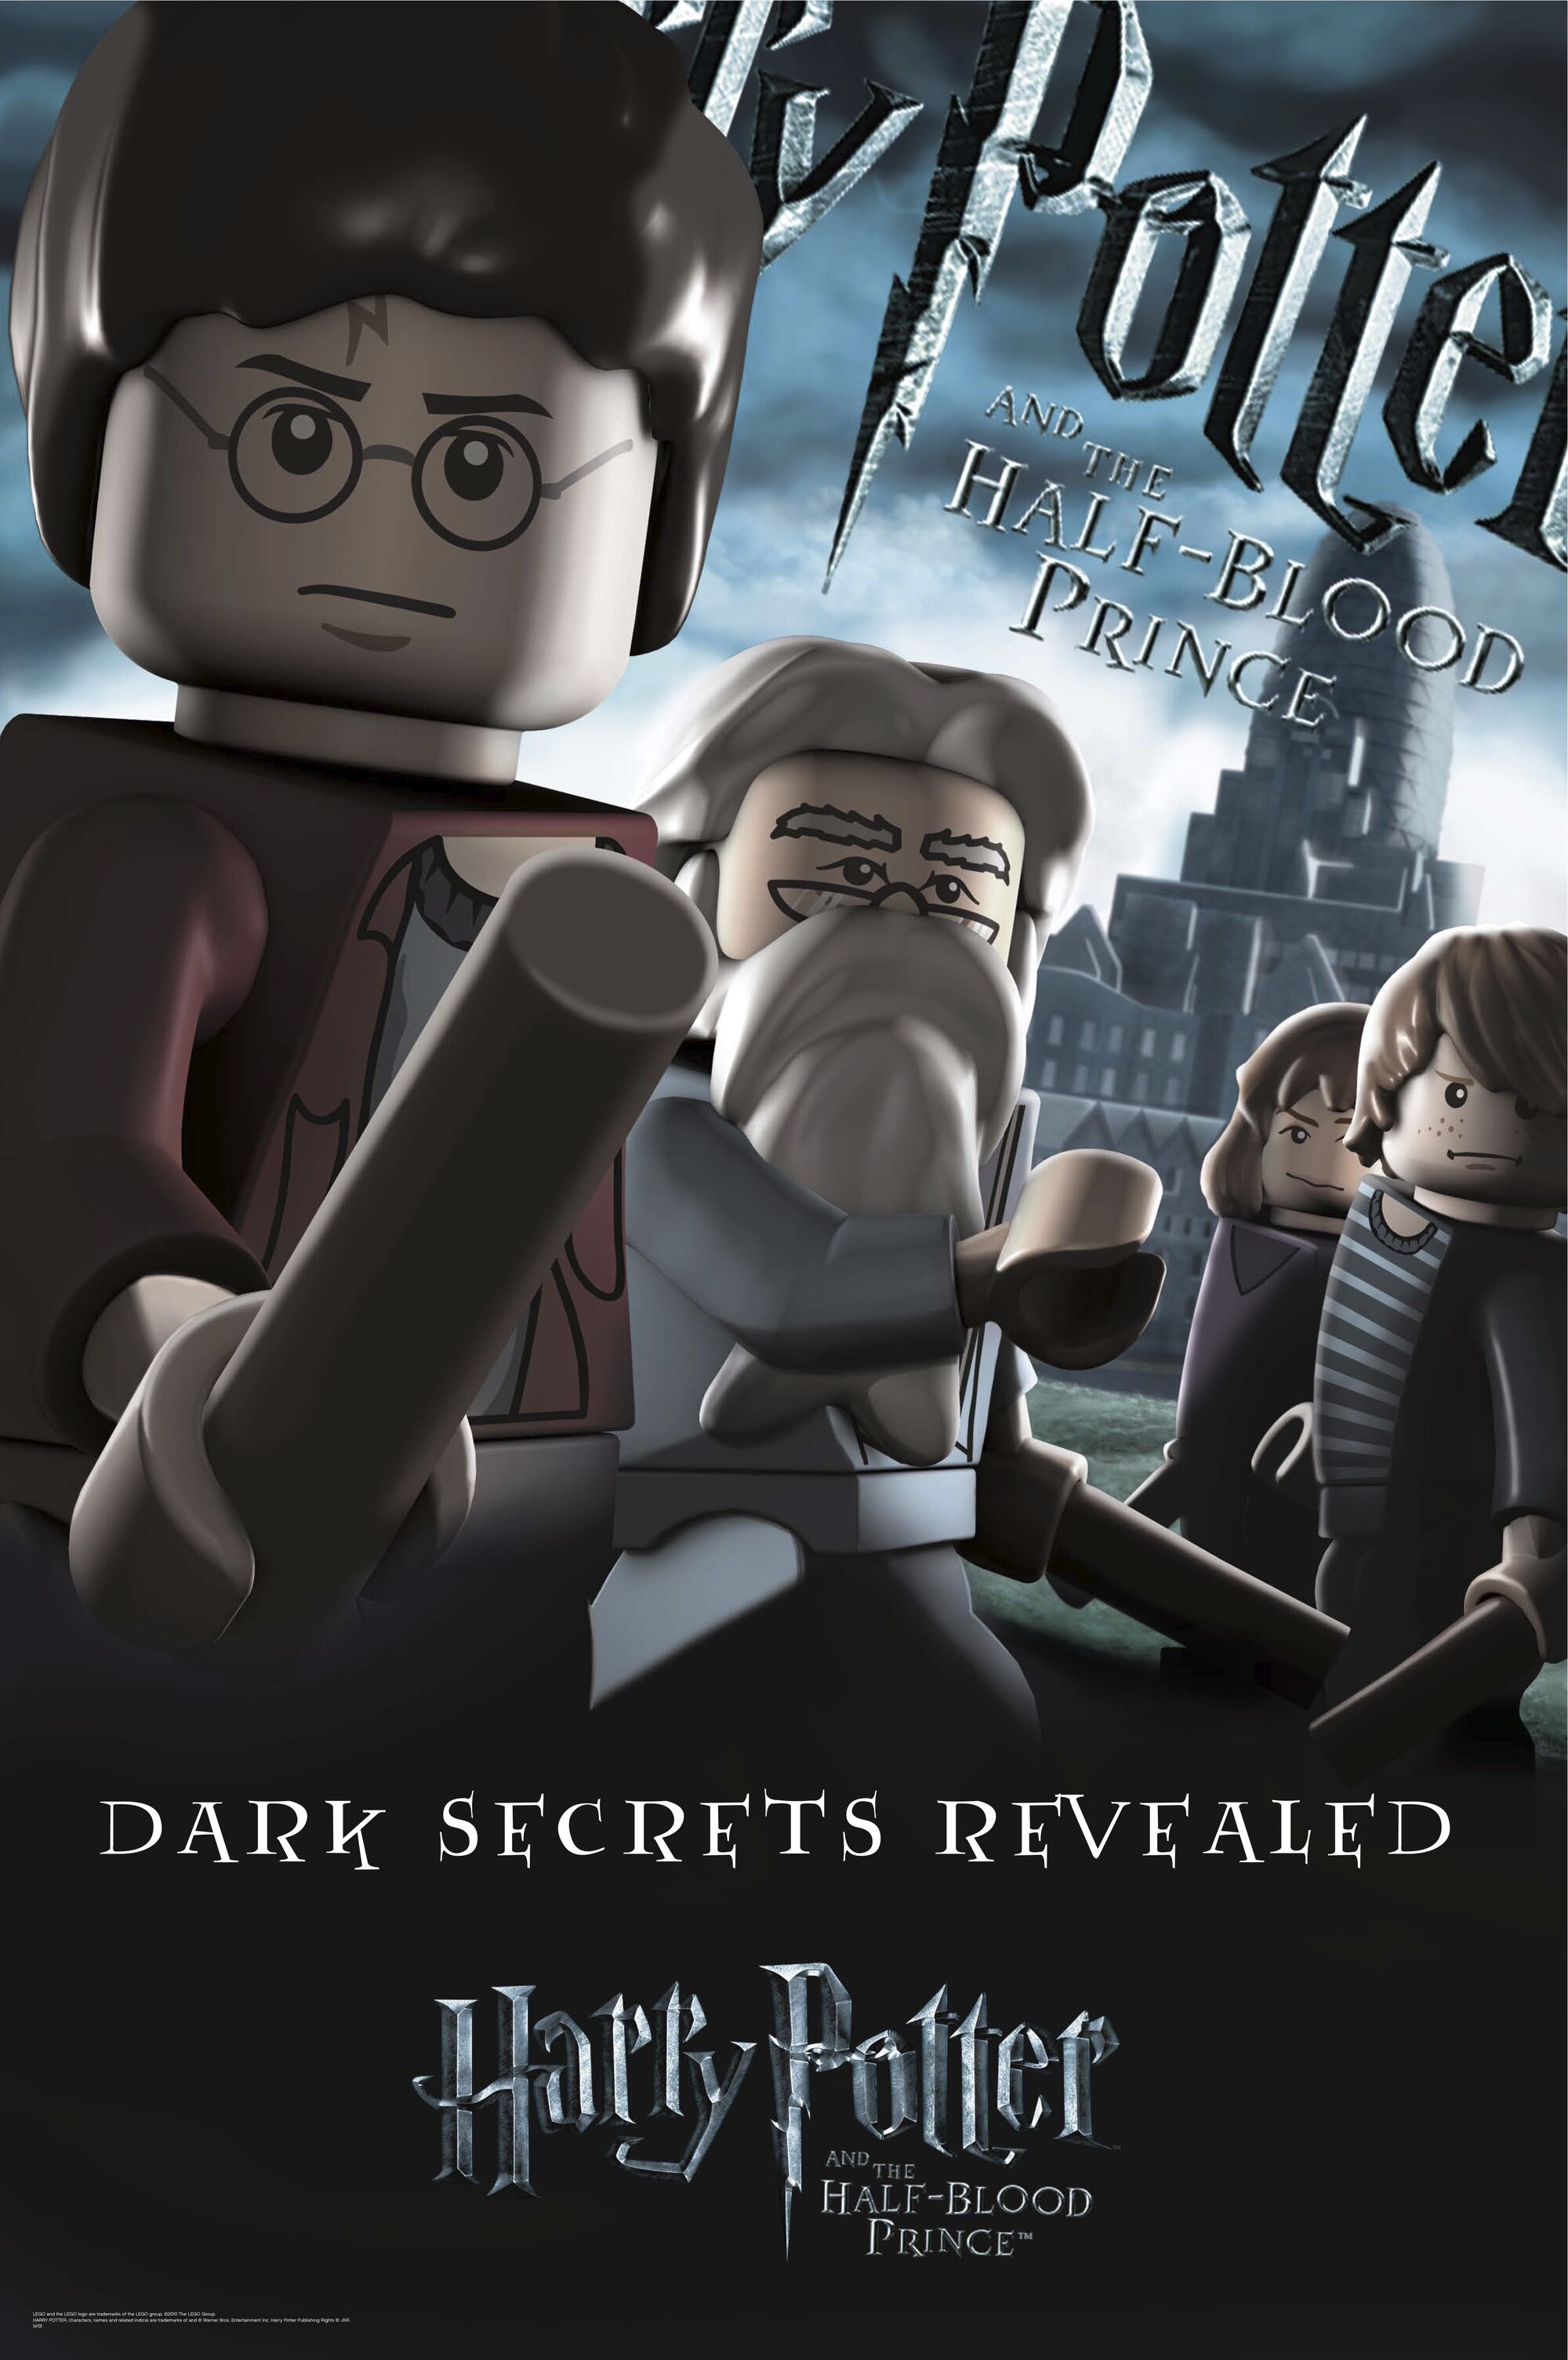 image-lego-harry-potter-and-the-half-blood-prince-jpg-harry-potter-wiki-fandom-powered-by